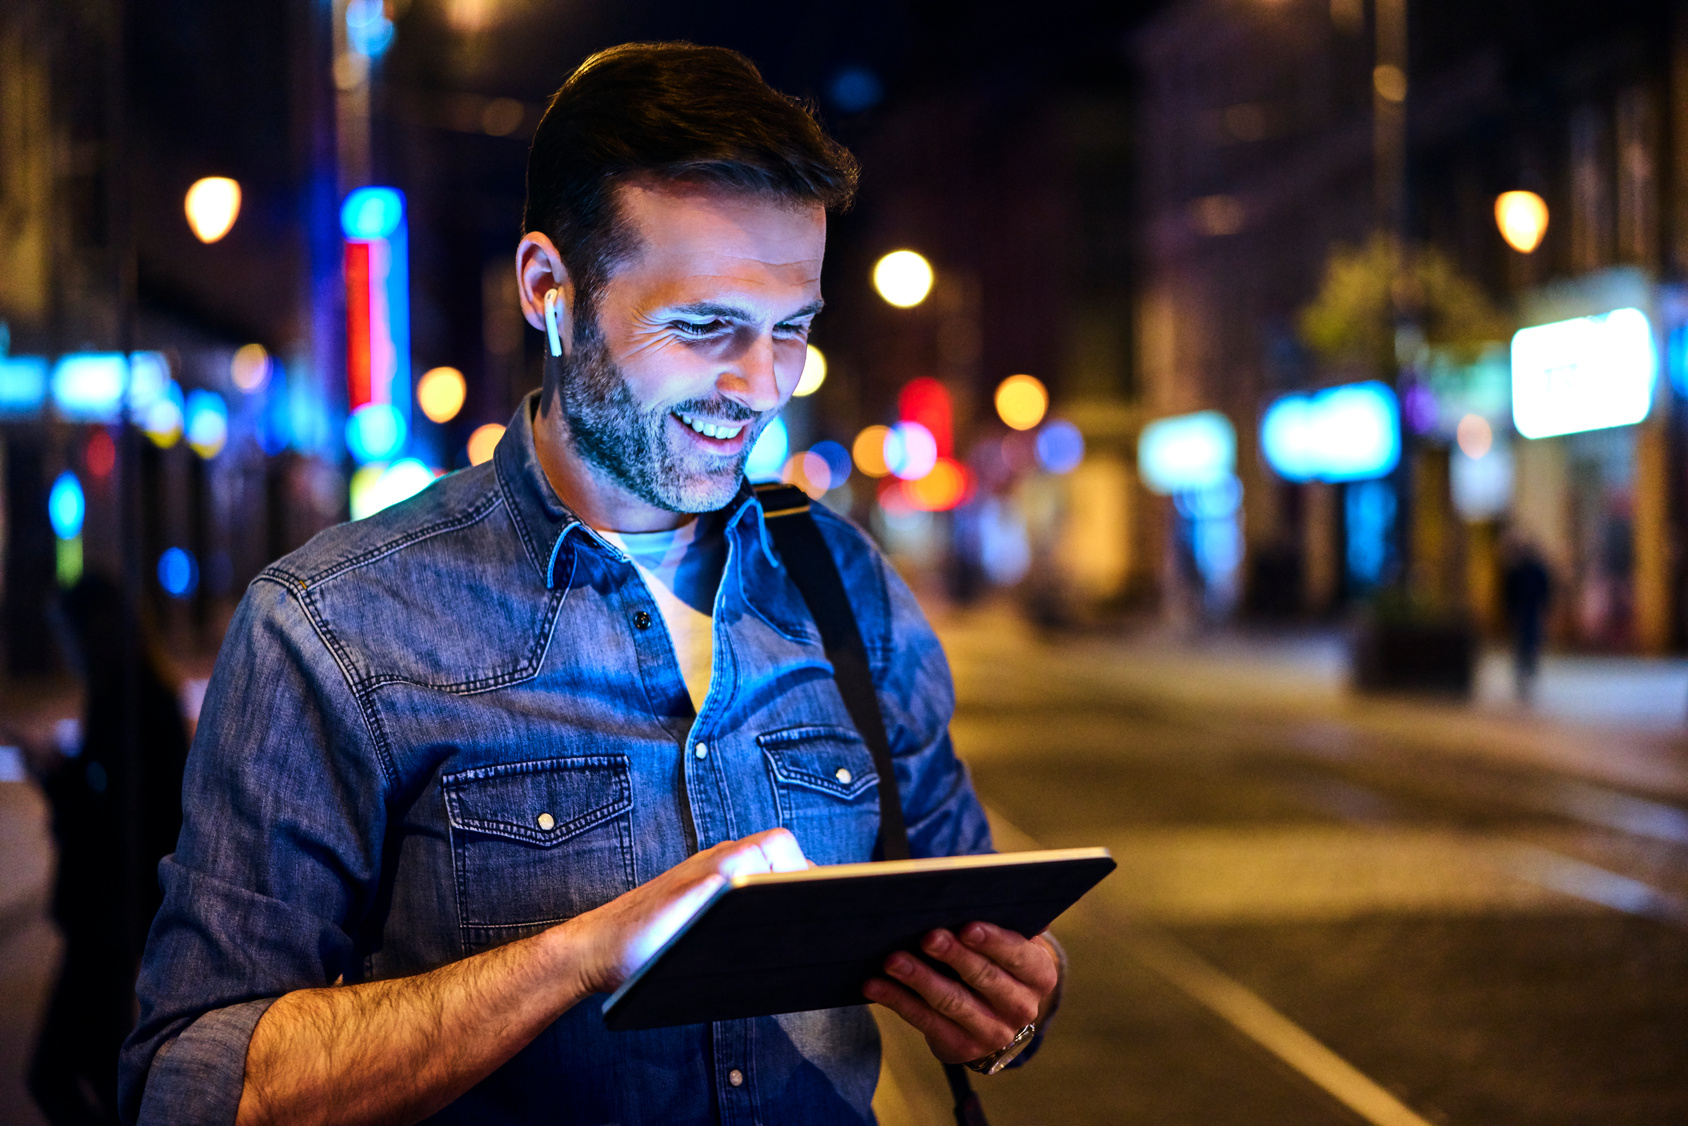 Portrait of man wearing wireless headphones and using tablet while standing at tram stop at night